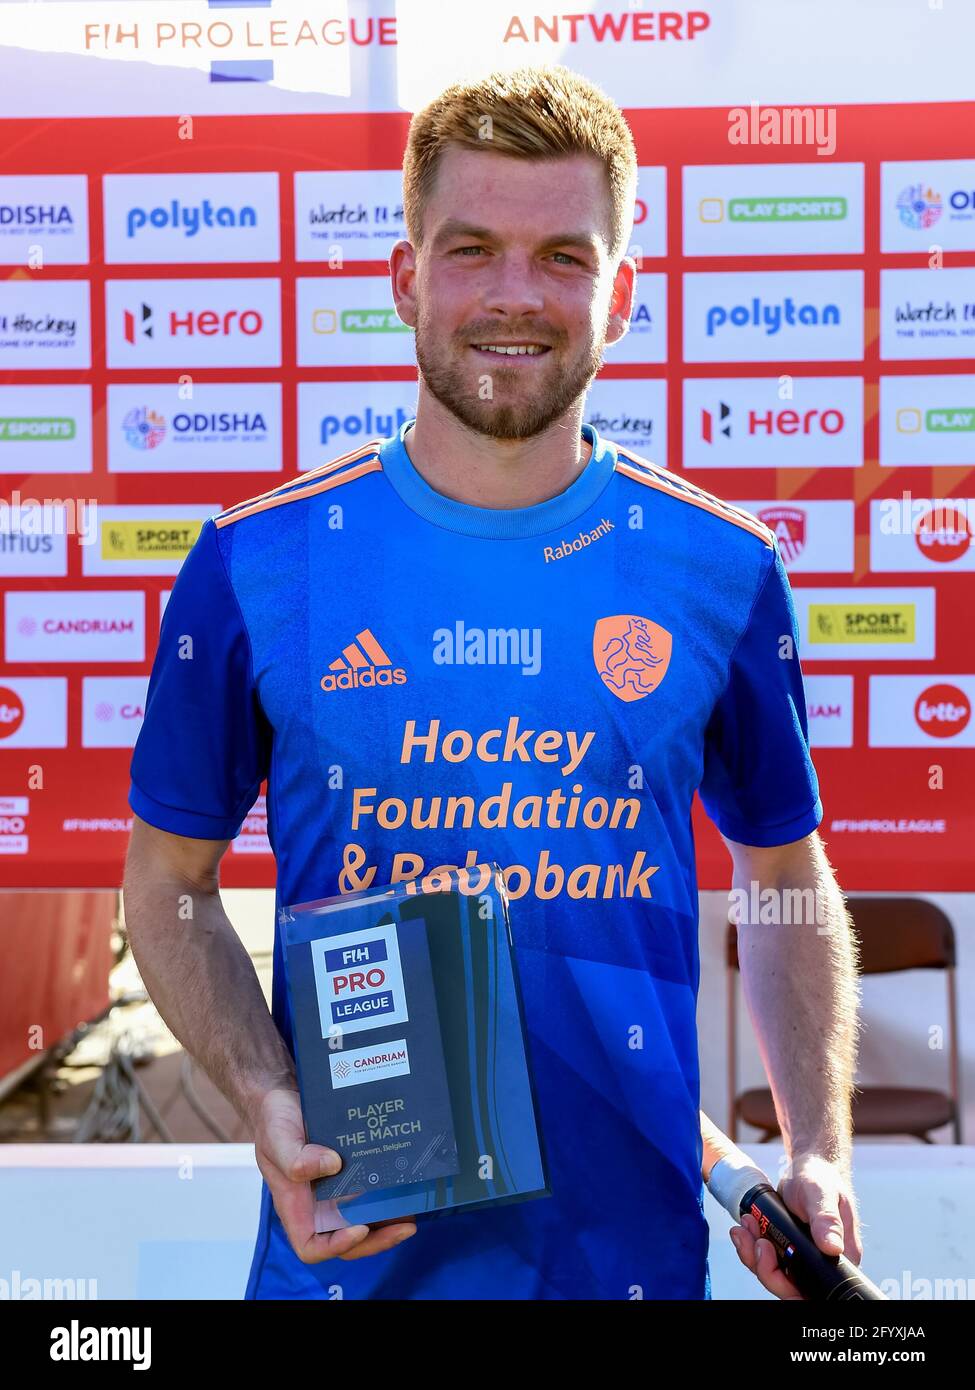 ANTWERP, BELGIUM - MAY 30: Thierry Brinkman of the Netherlands poses for a photo with the award for Player of the Match during the Mens FIH Pro League match between Belgium and Netherlands at Sportcentrum Wilrijkse on May 30, 2021 in Antwerp, Belgium (Photo by Philippe de Putter/Orange Pictures) Stock Photo